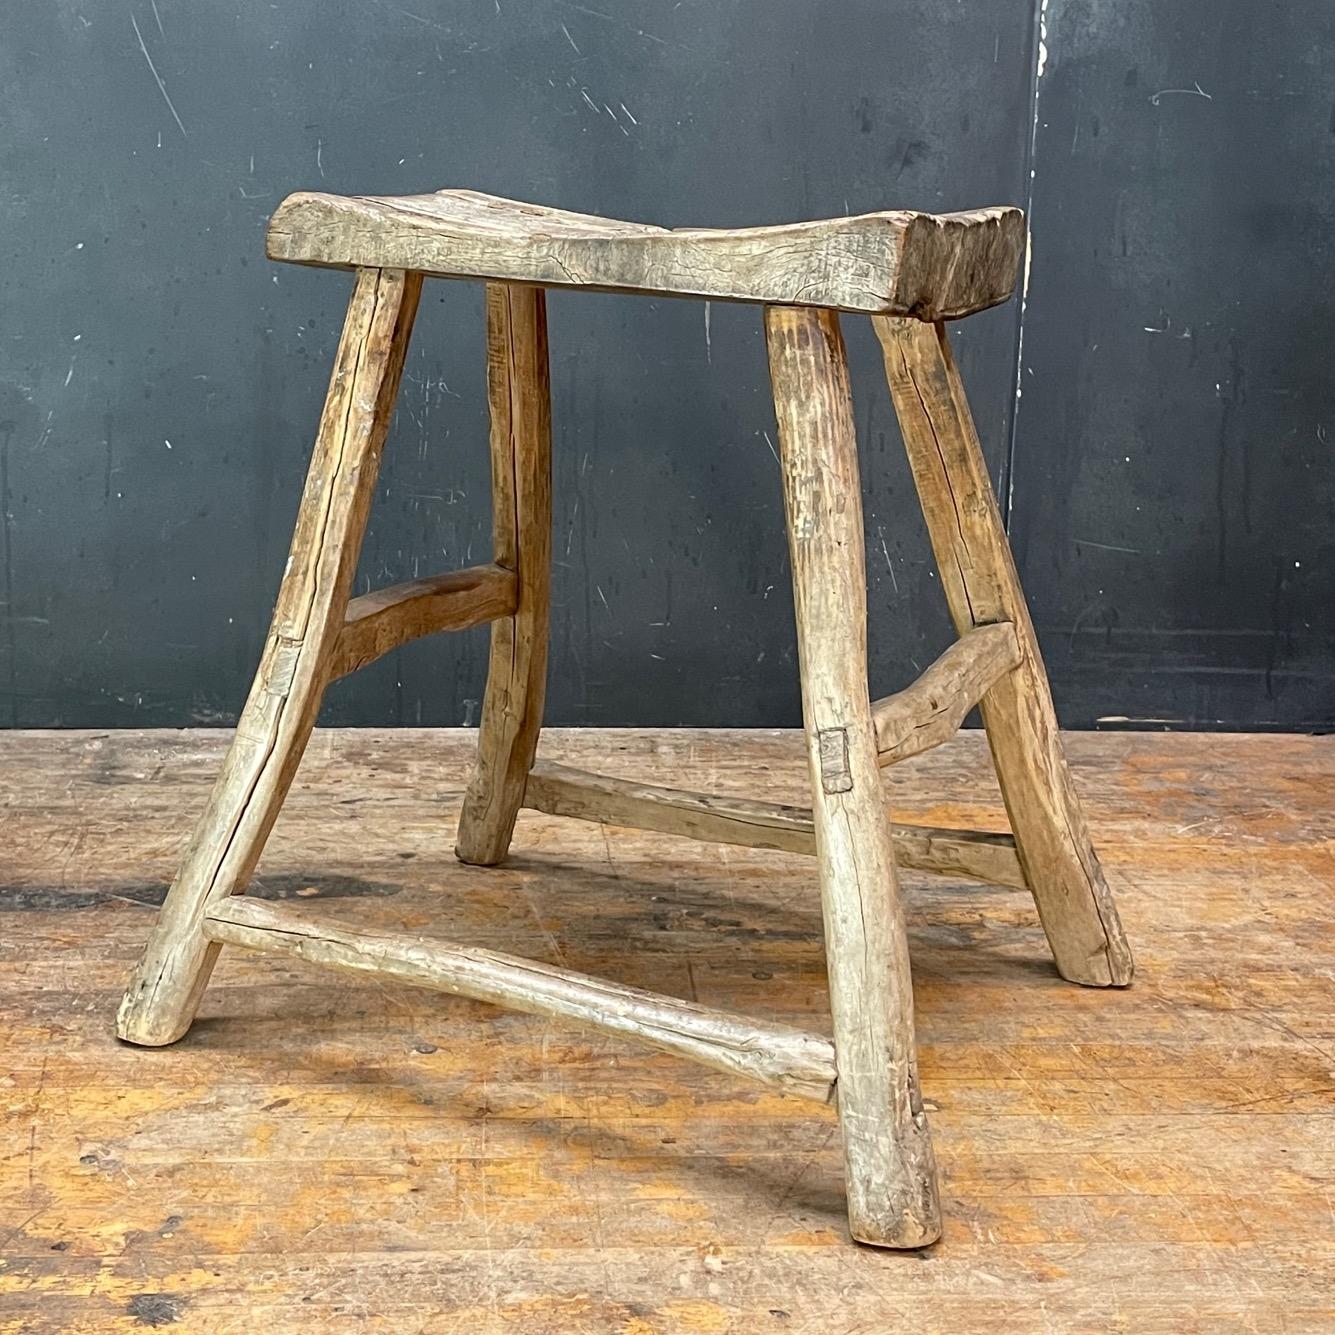 Antique Chinese Hand-Carved Wood Elm Writing Console Entryway Table Pi Stool In Distressed Condition For Sale In Hyattsville, MD